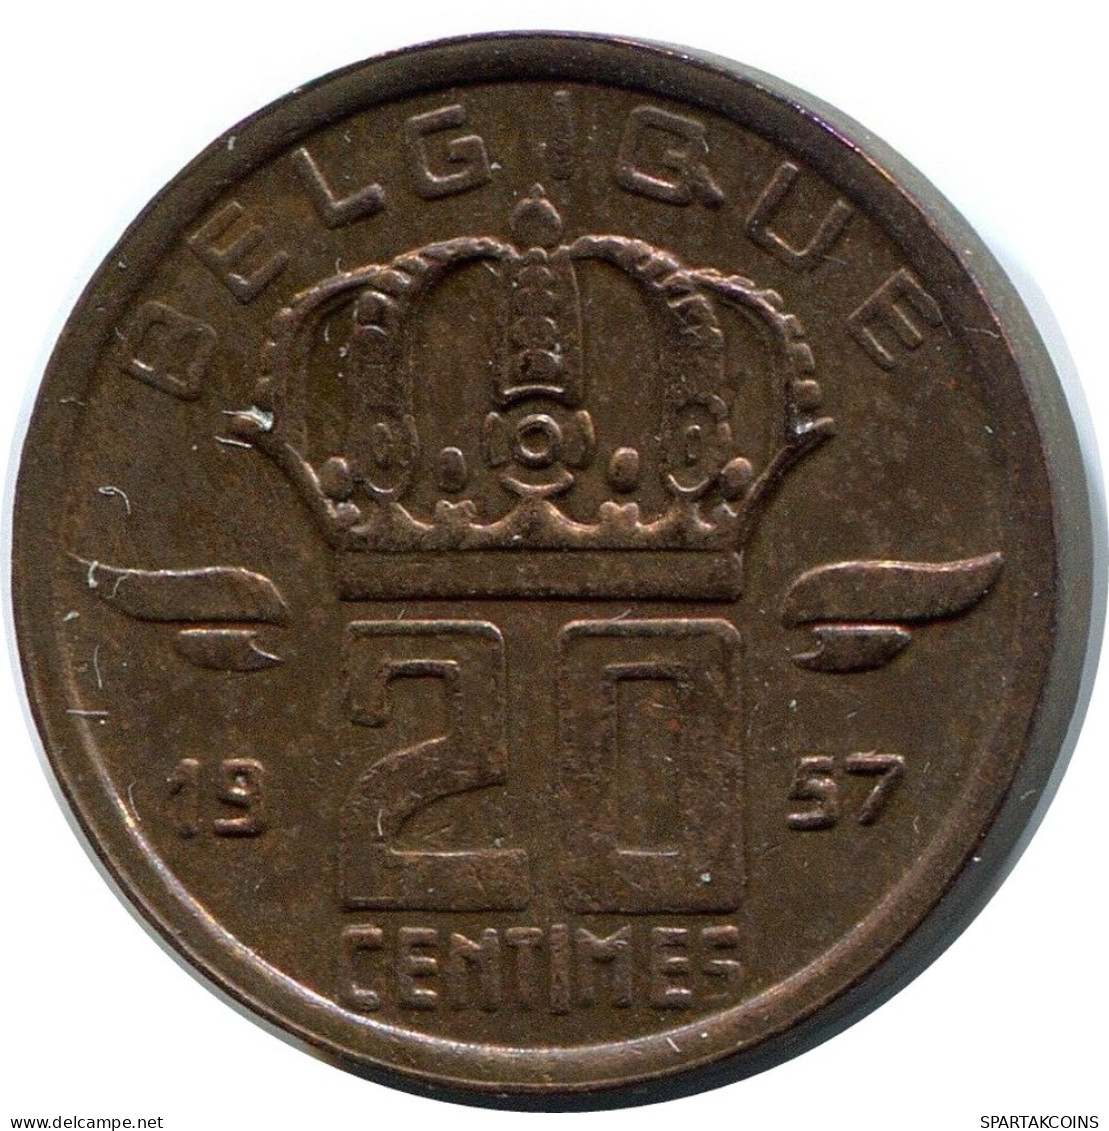 20 CENTIMES 1957 FRENCH Text BELGIUM Coin #BA399.U.A - 25 Cents